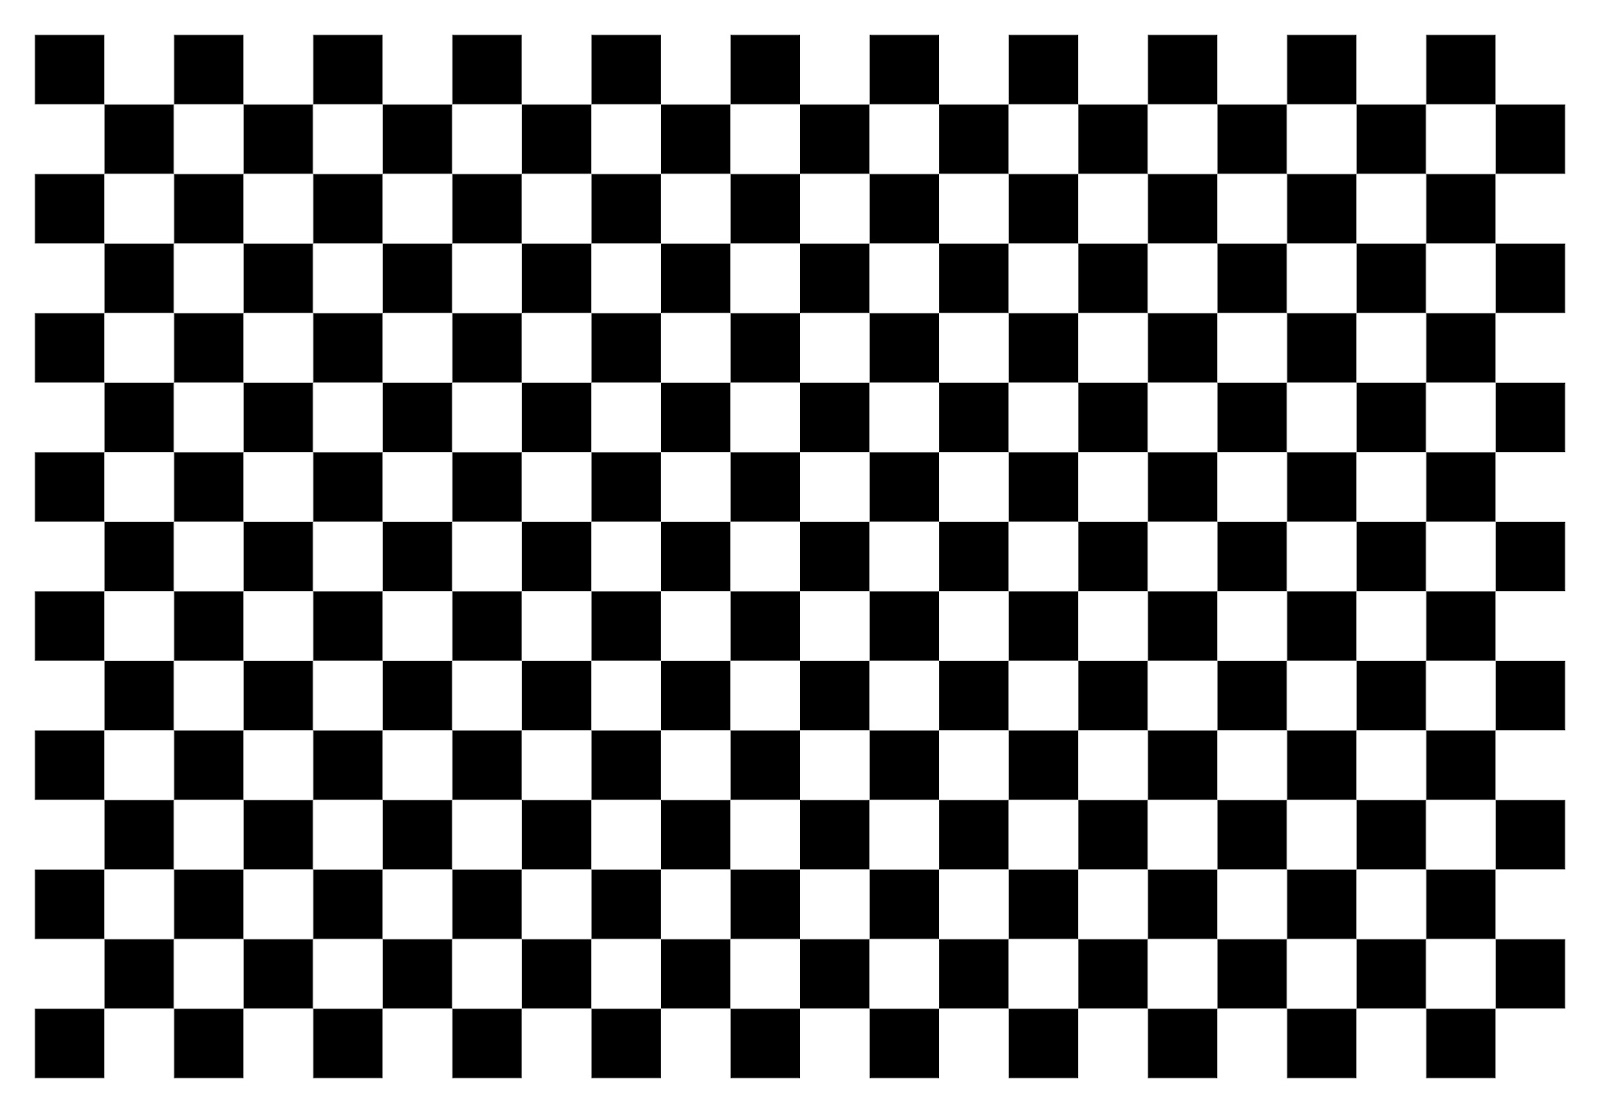 StereoMorph: Creating a checkerboard pattern